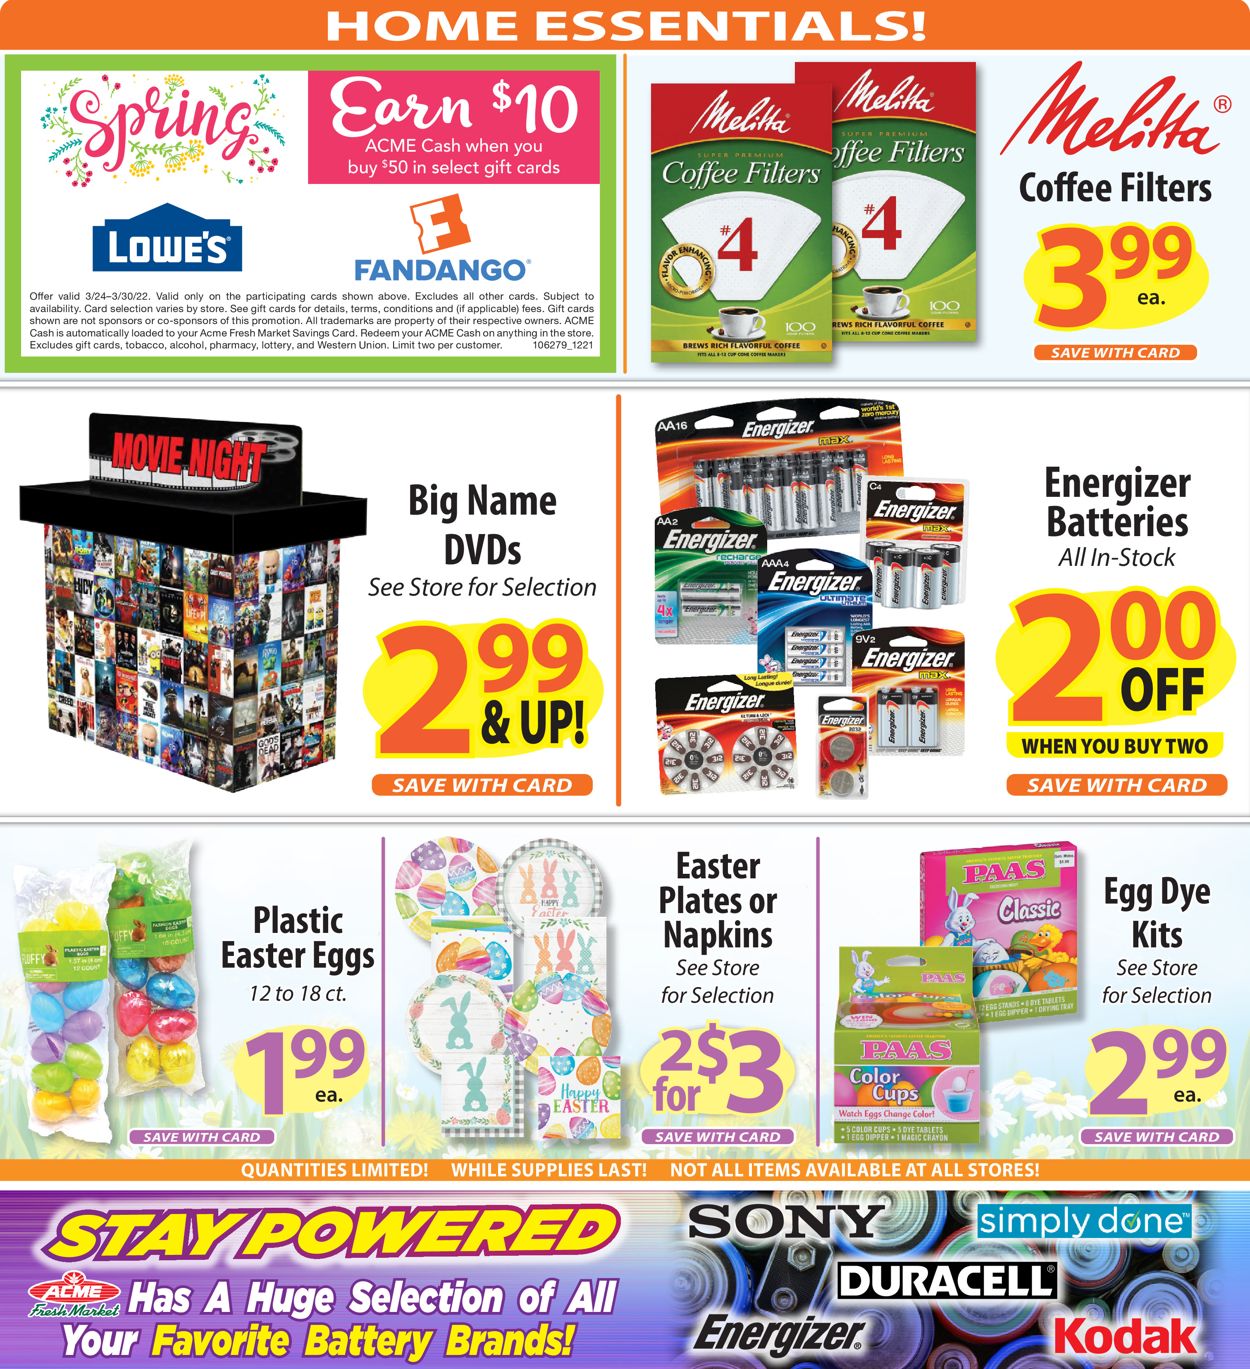 Acme Fresh Market Ad from 03/24/2022